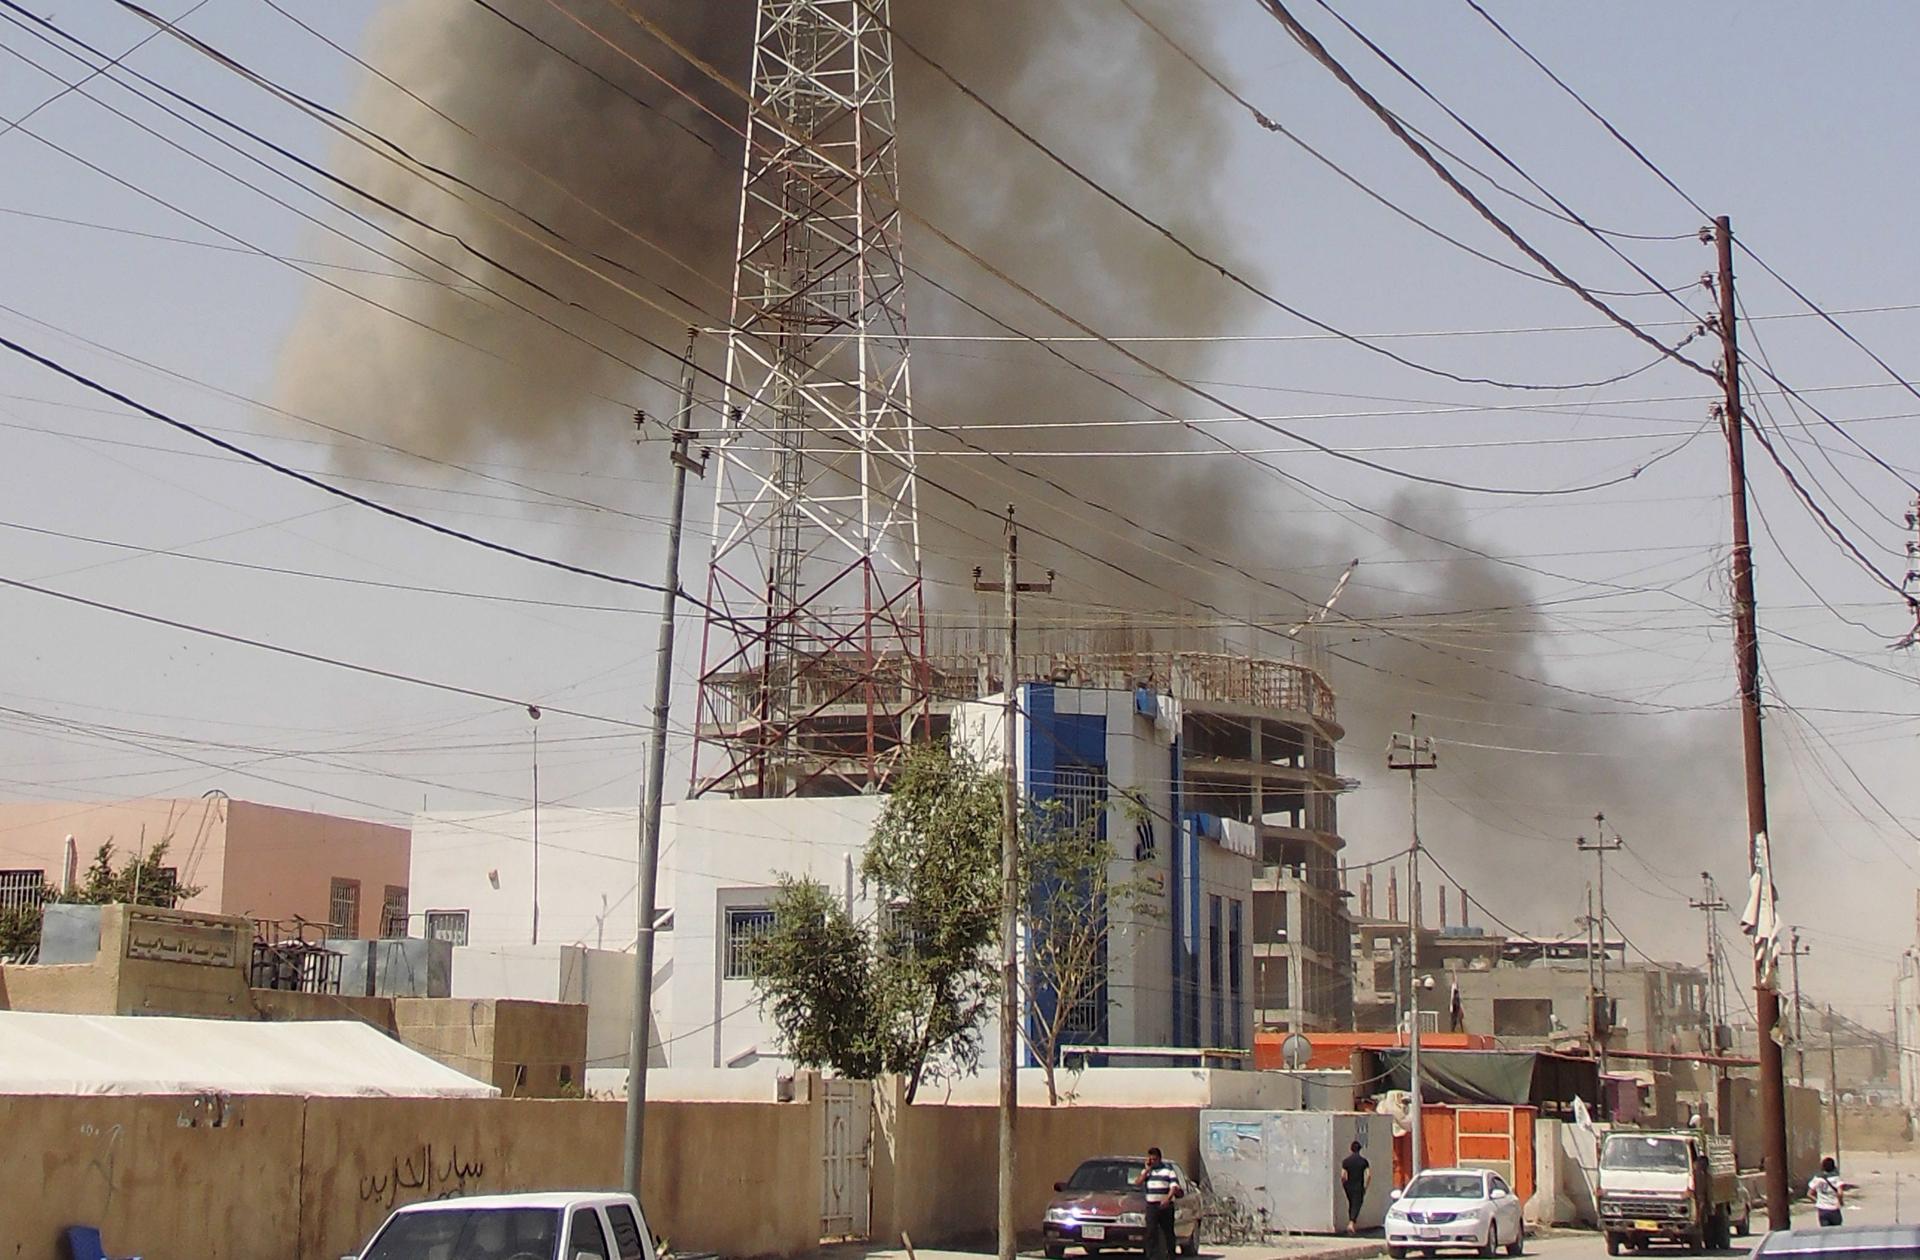 Smoke rises after a bomb attack in the city of Ramadi, May 15, 2015.